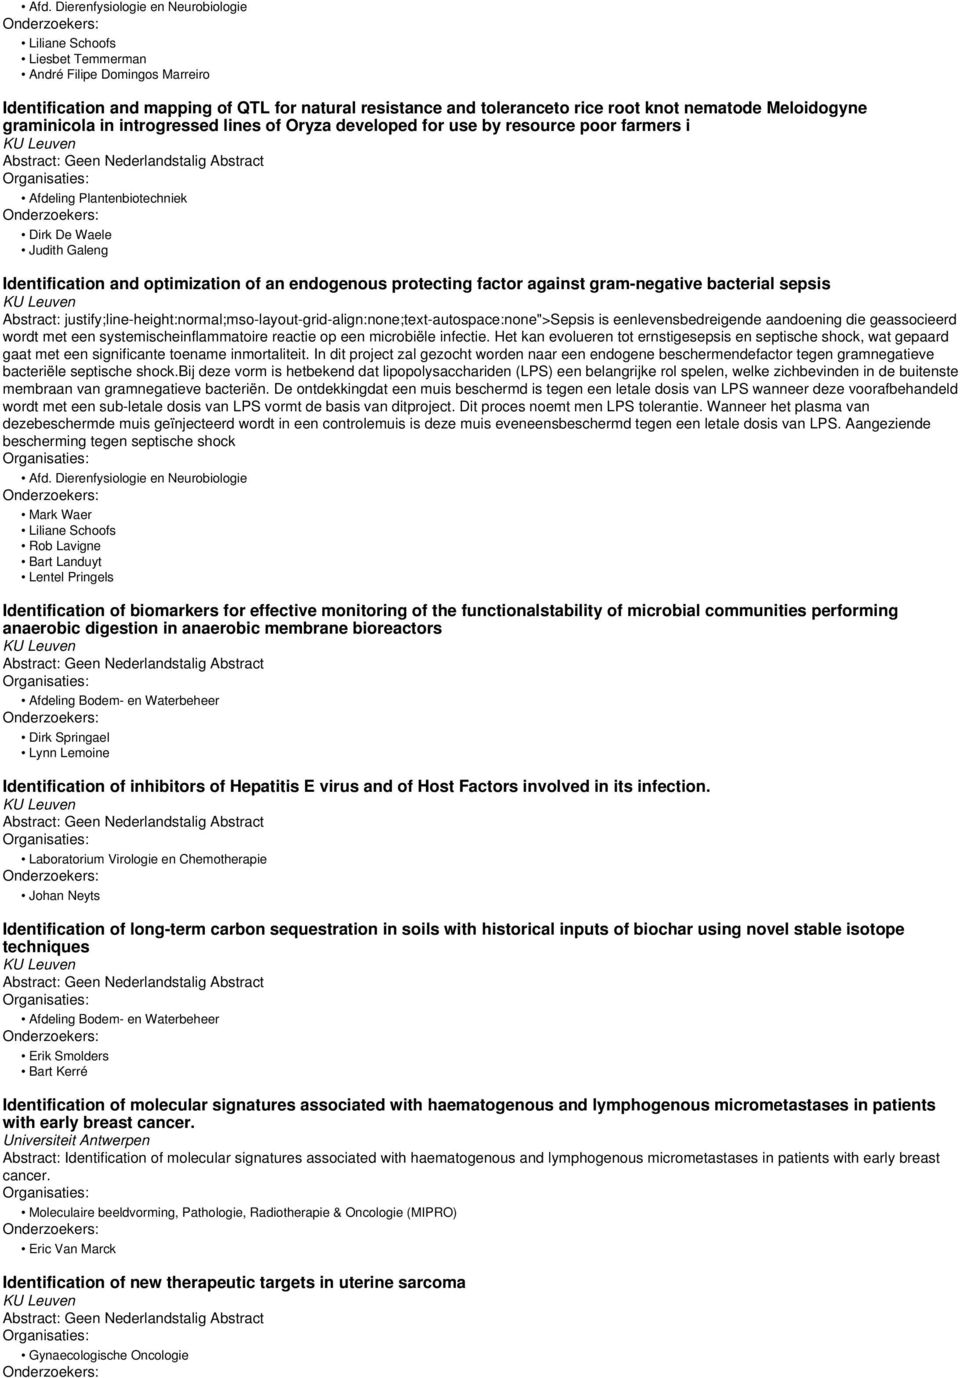 an endogenous protecting factor against gram-negative bacterial sepsis Abstract: justify;line-height:normal;mso-layout-grid-align:none;text-autospace:none">sepsis is eenlevensbedreigende aandoening